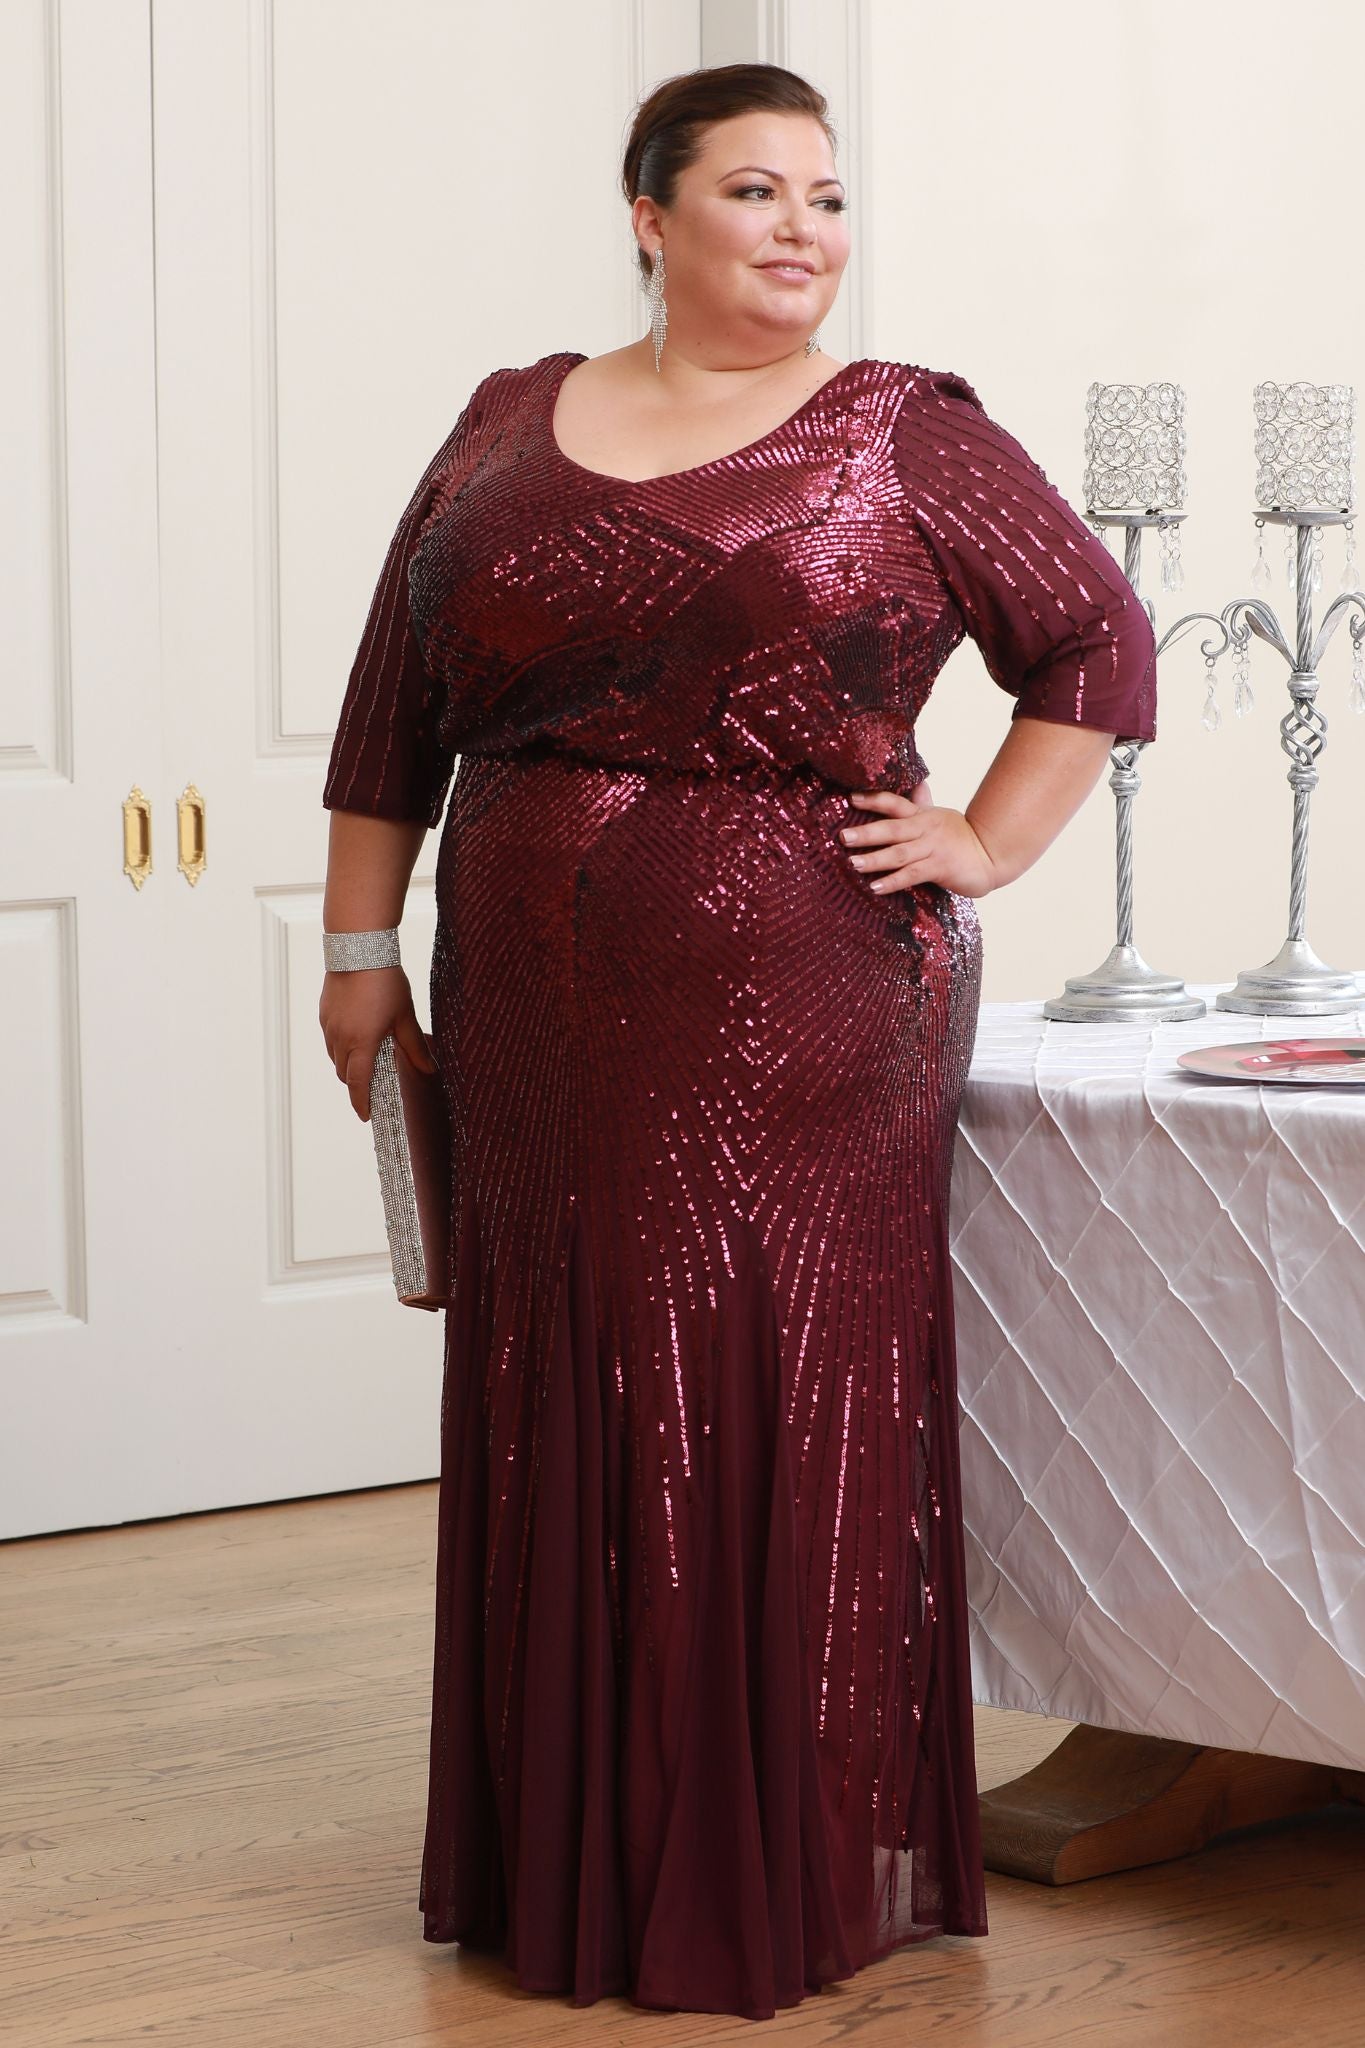 plus size ball gown dresses